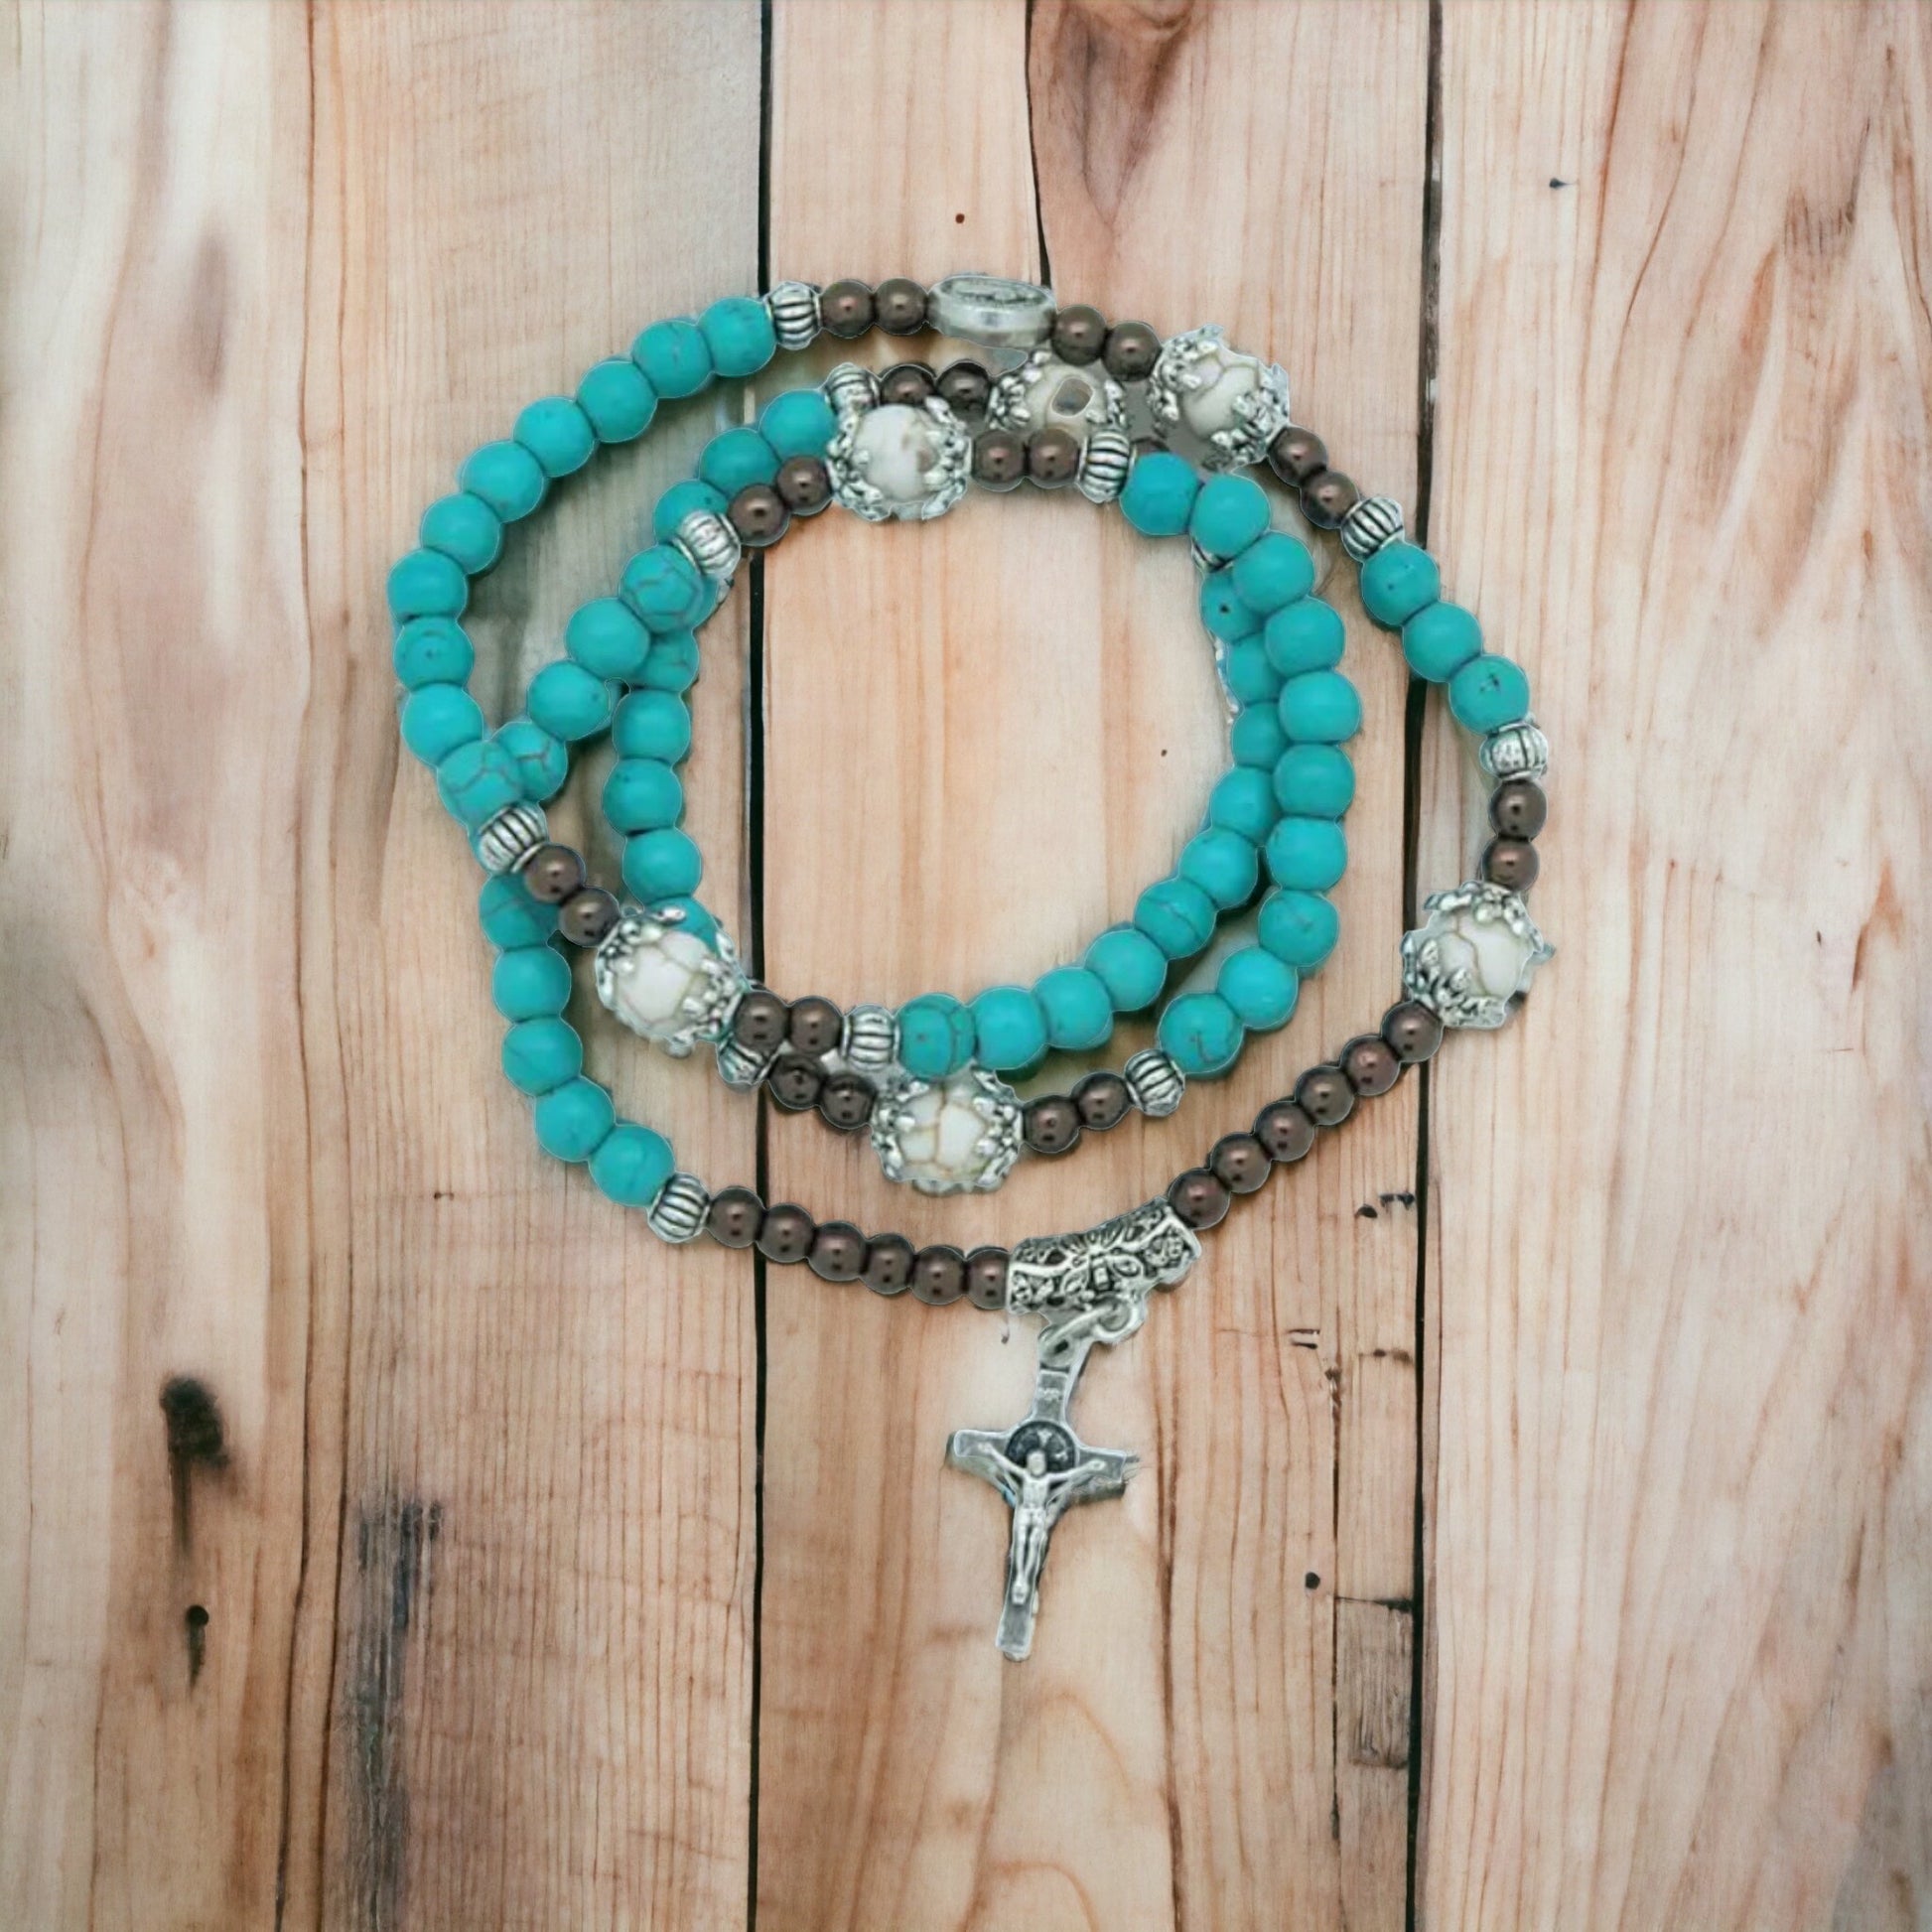 St Benedict Turqoise Rosary bracelet from Fatima Portugal